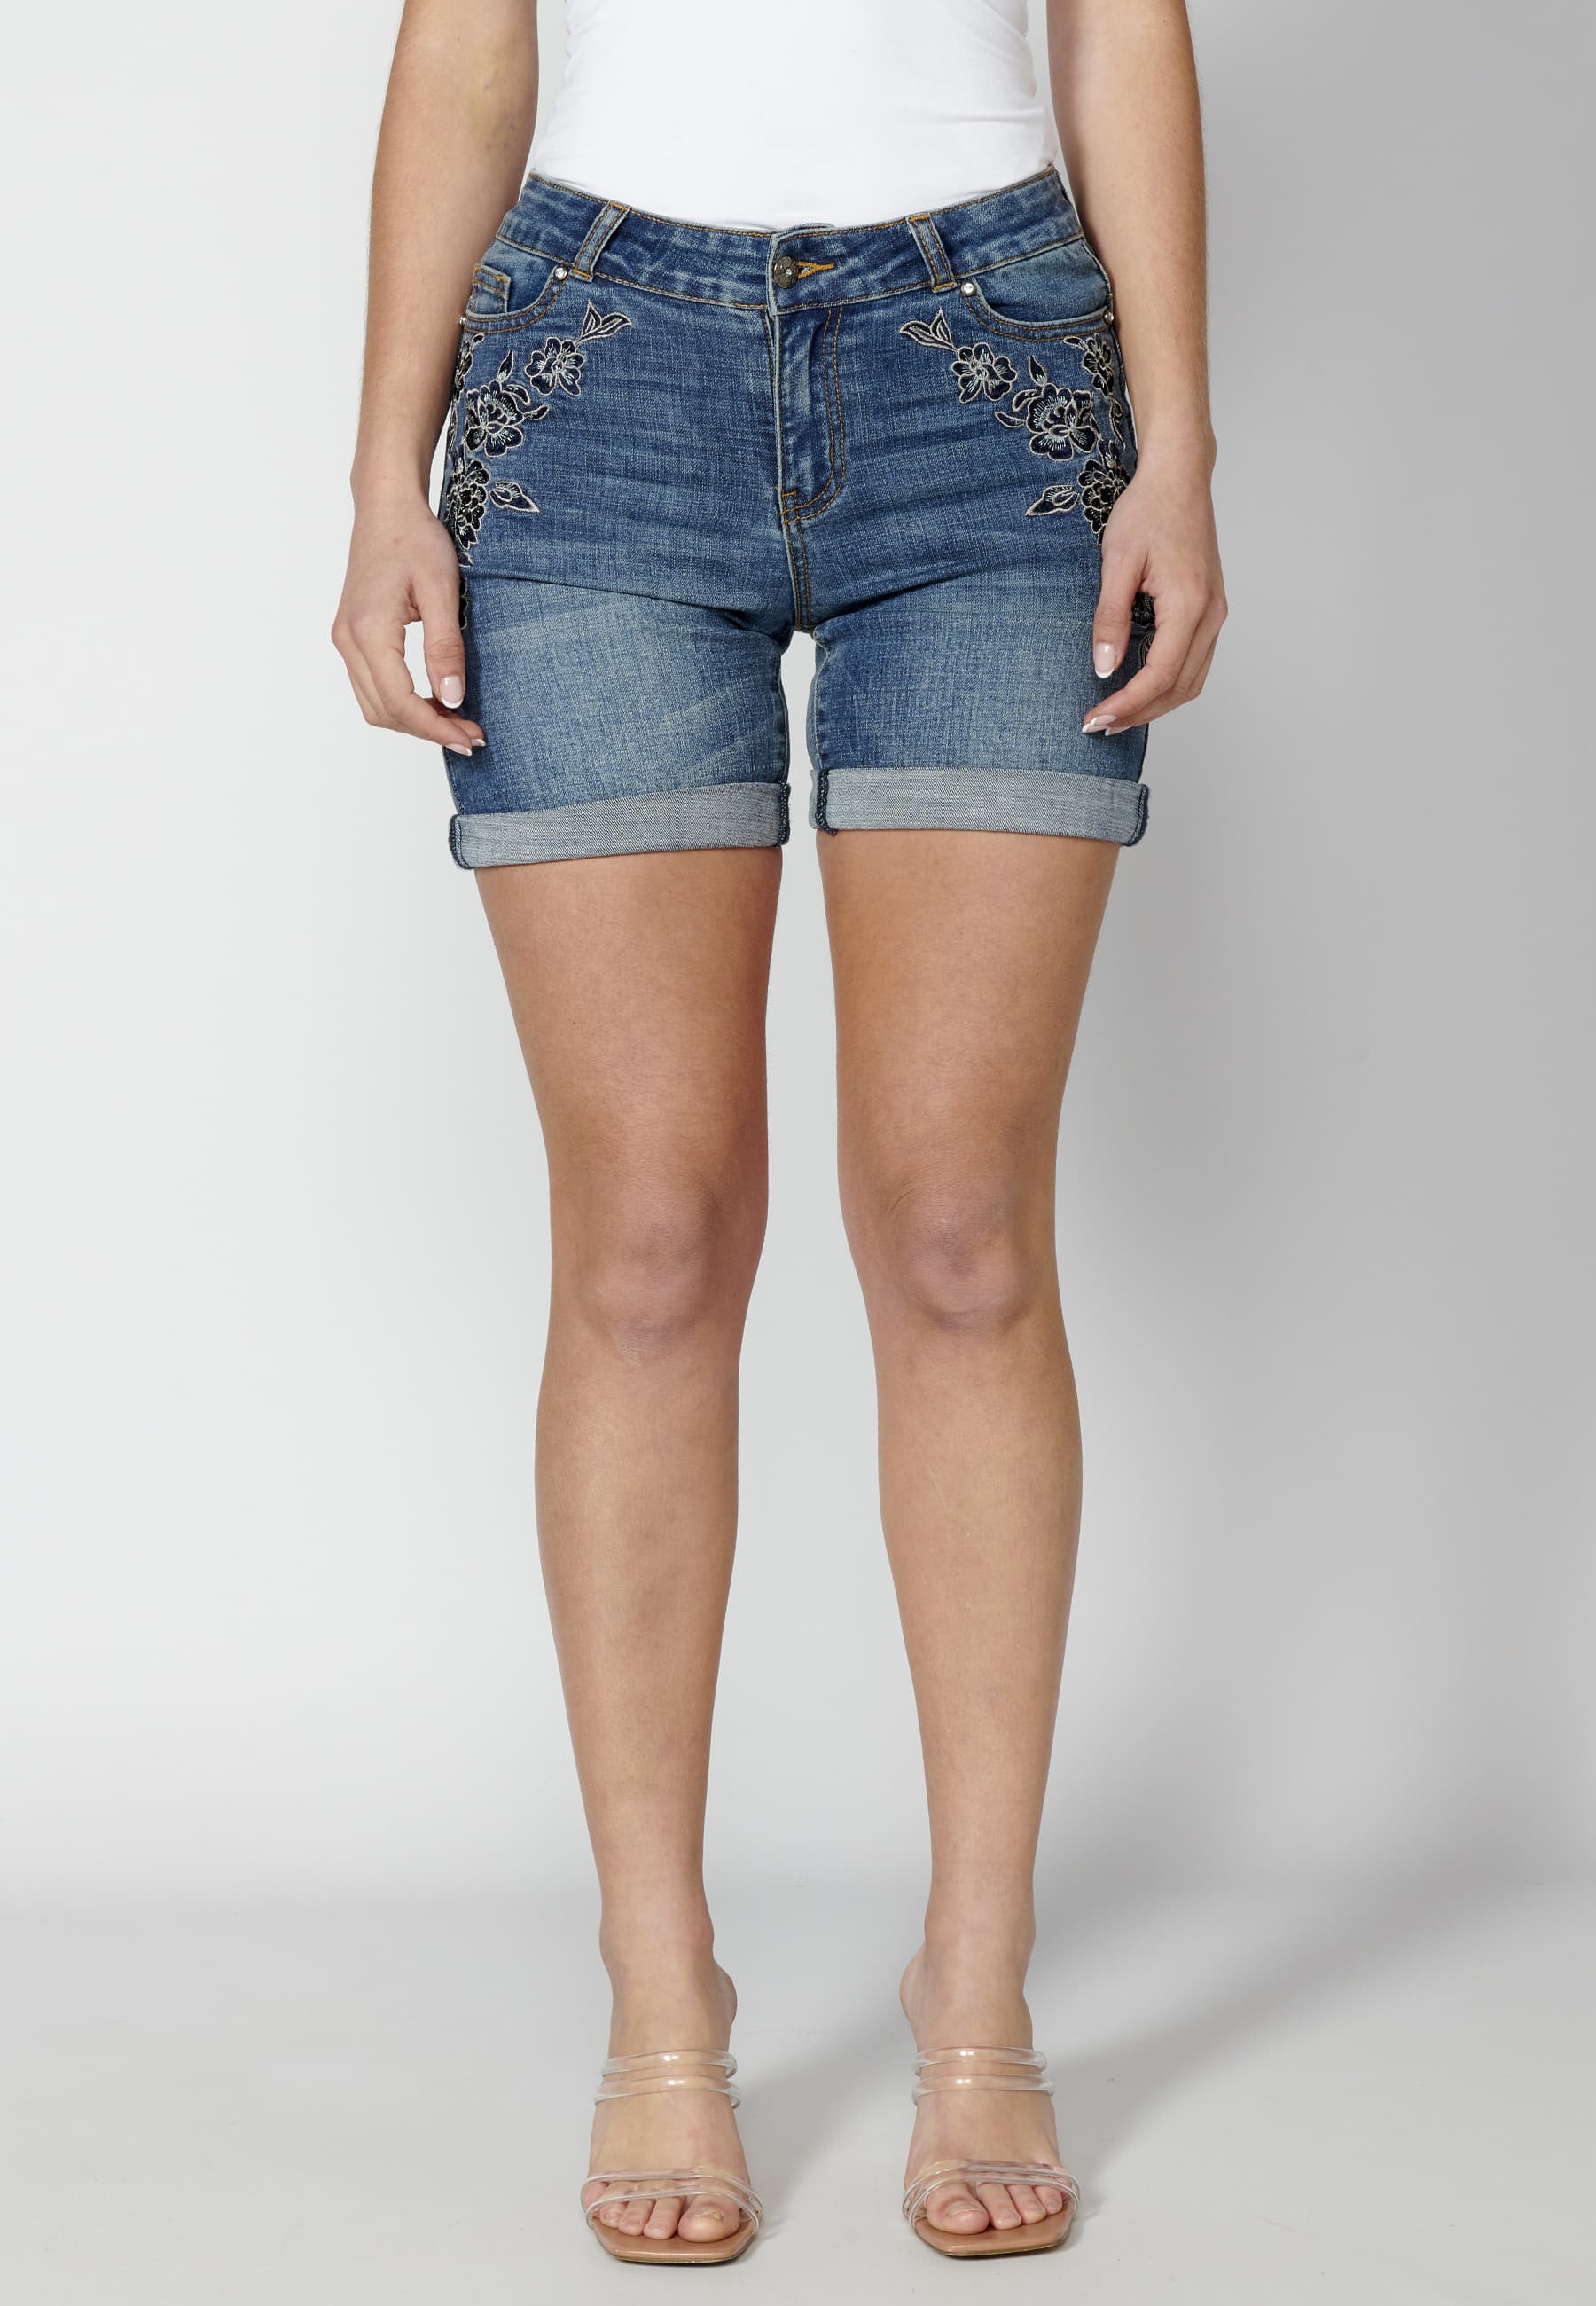 Blue shorts with turn-up finish and floral details for Woman